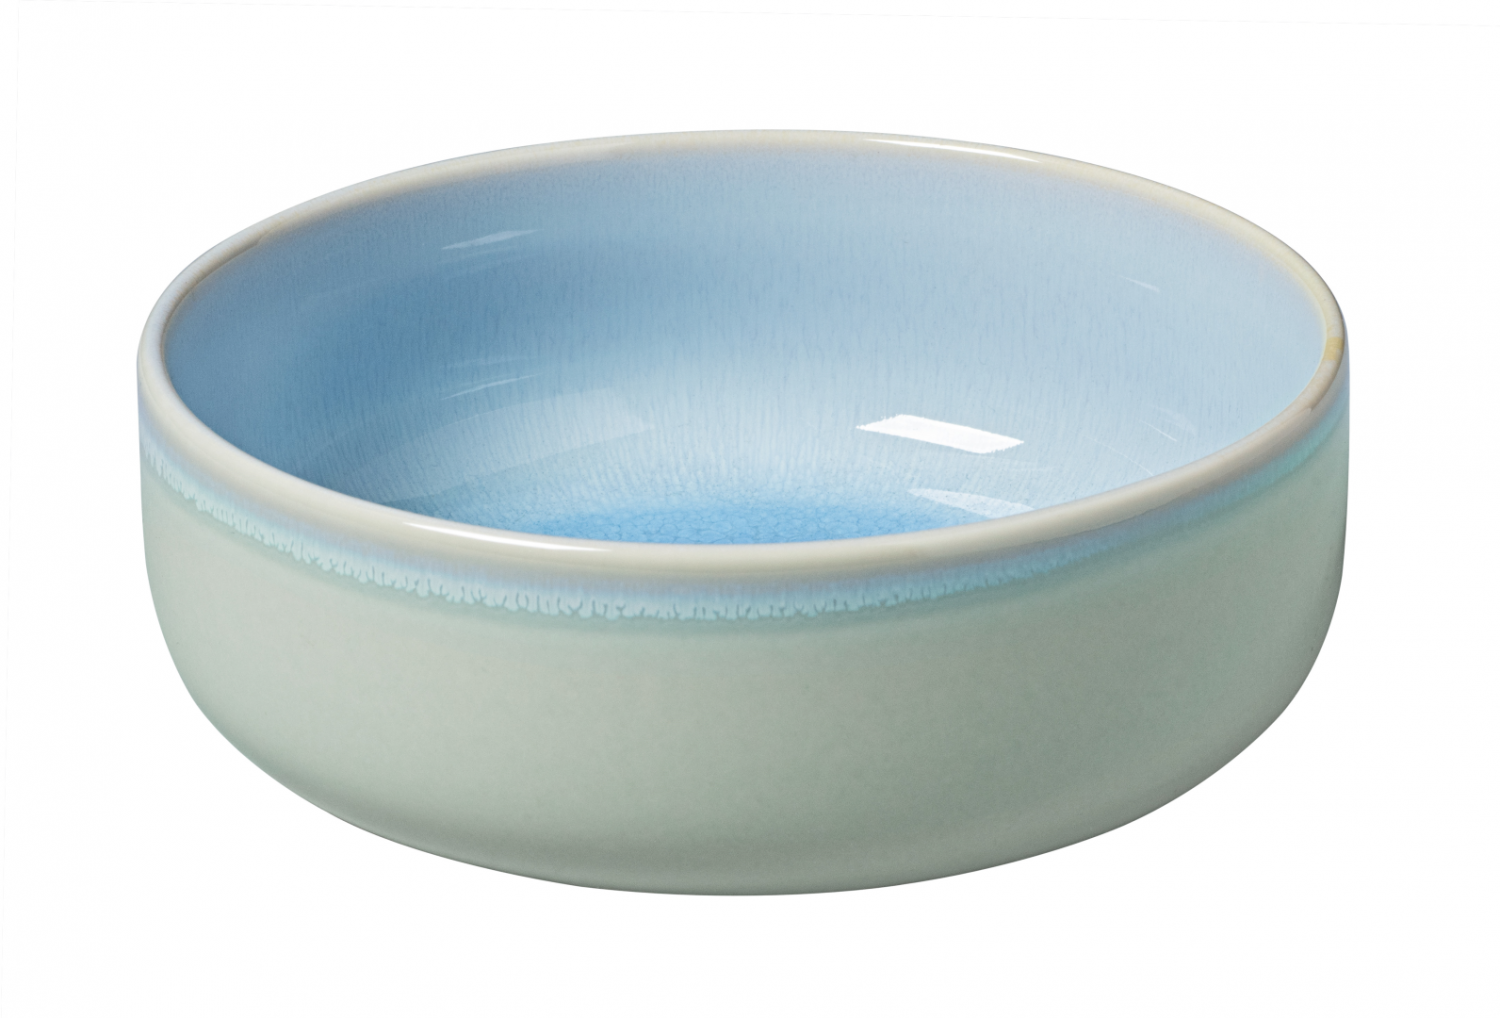 Villeroy & Boch Crafted Bowl Blueberry 16cm